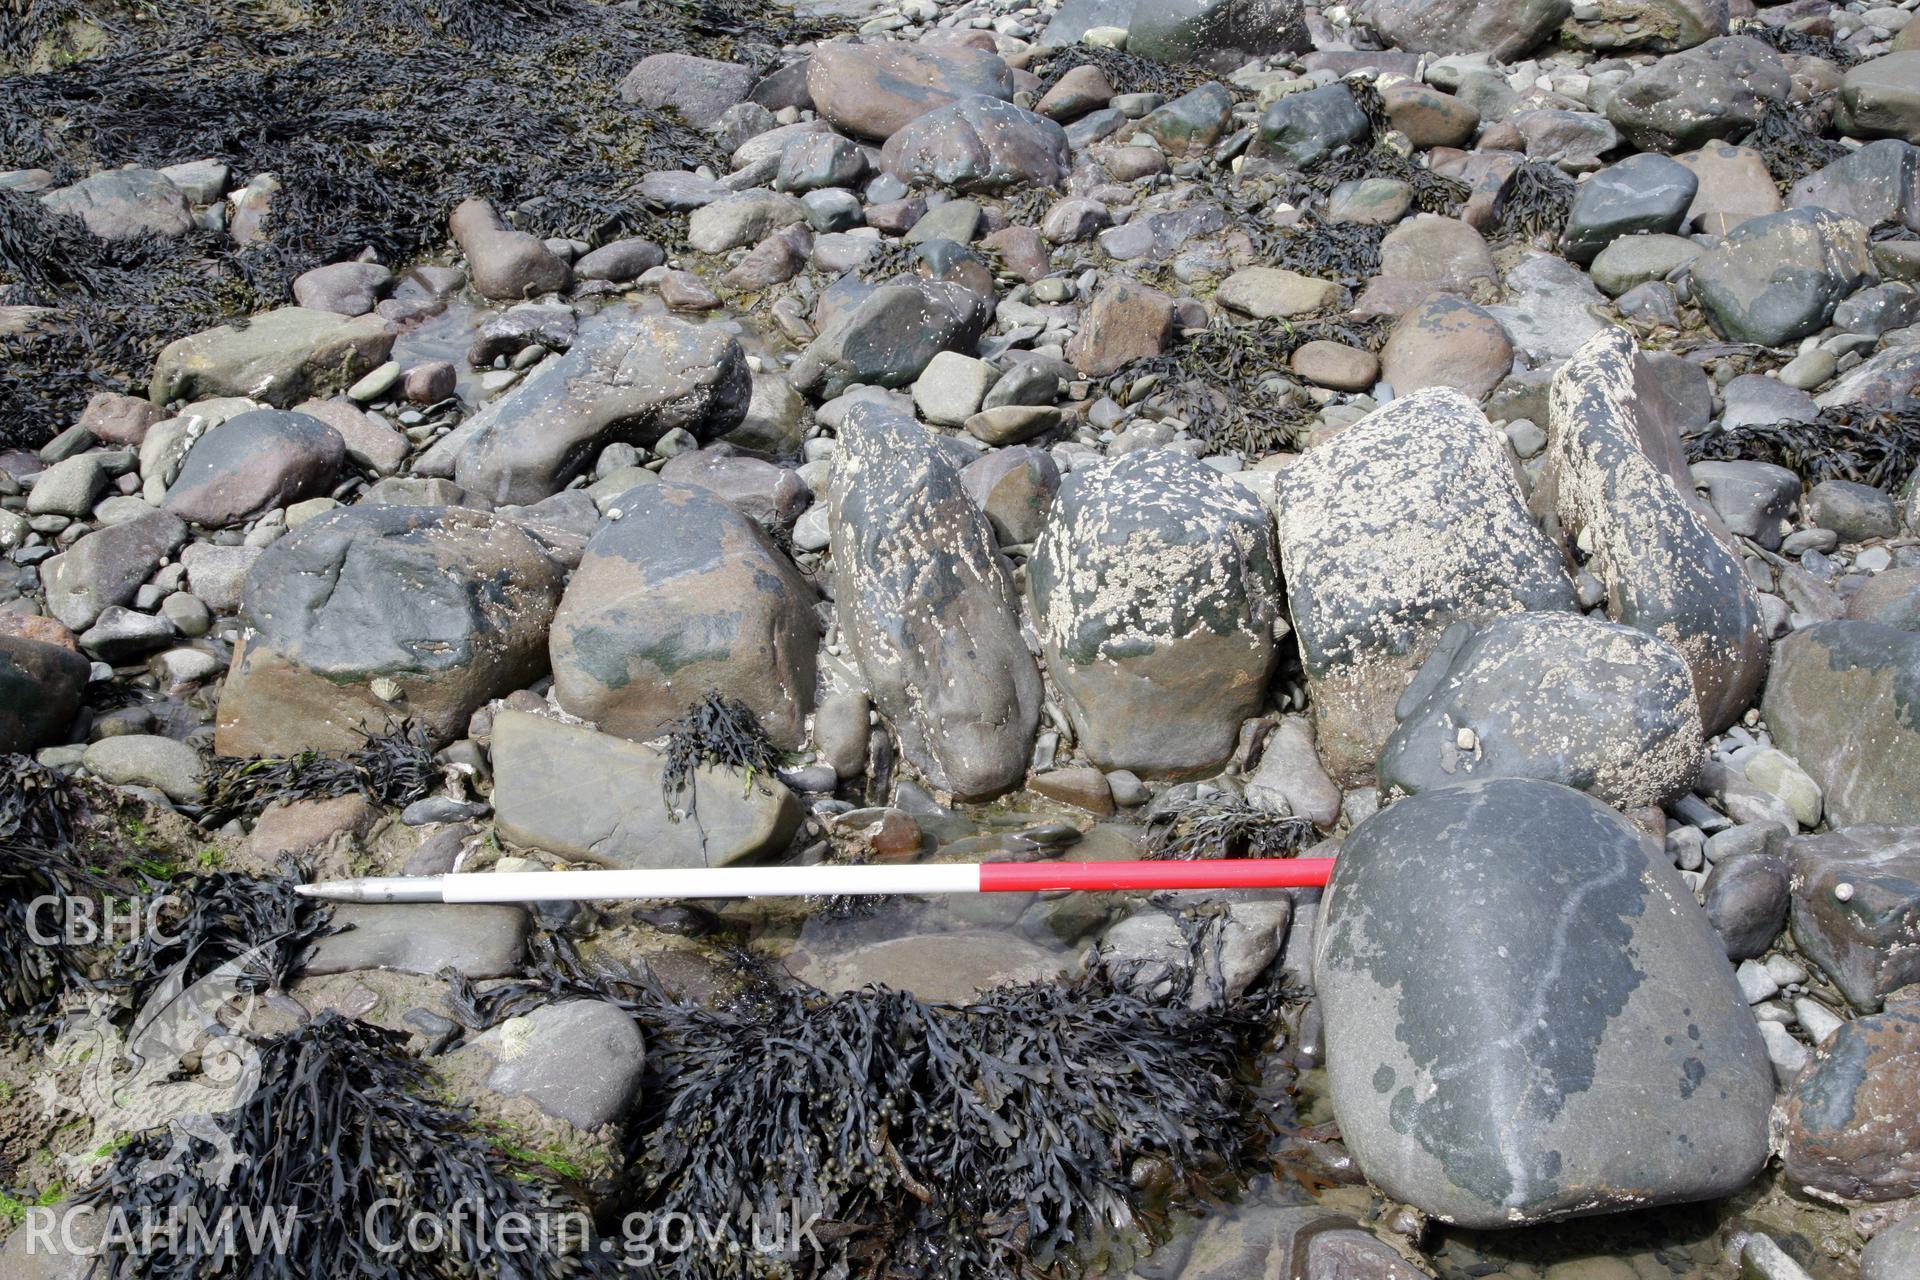 Northern section of fish trap arm, looking west. Shows alignment of boulders composing stone wall, with 2m ranging pole for scale.